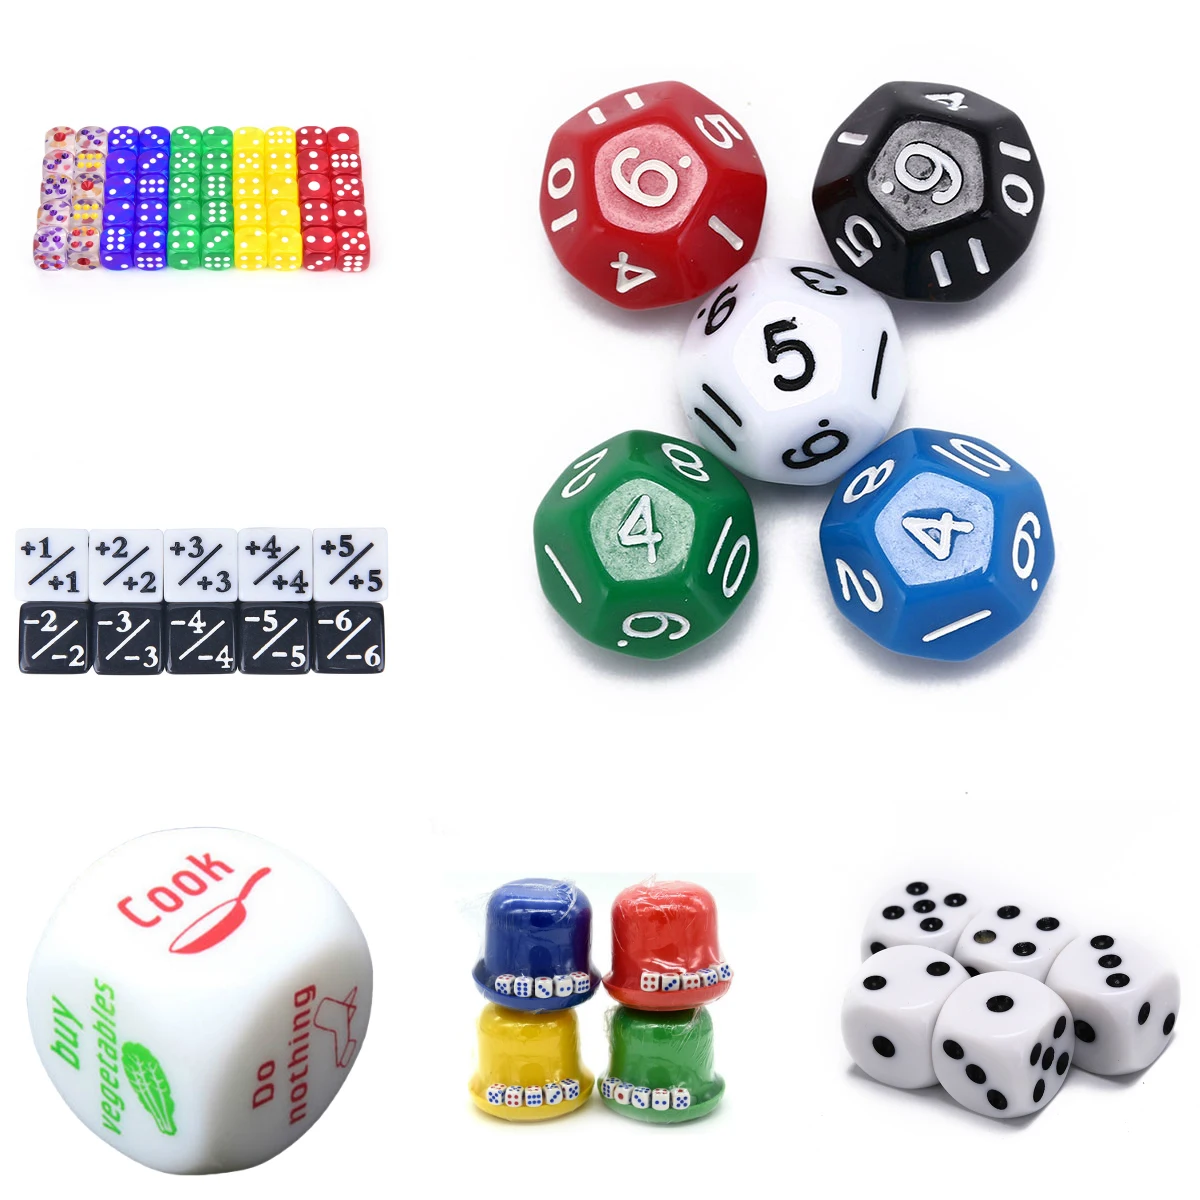 

Wholesale Dices Set Colorful Accessories for Board Game Digital dice Game Dungeons Dragons Polyhedral Multi Sided Acrylic Dice